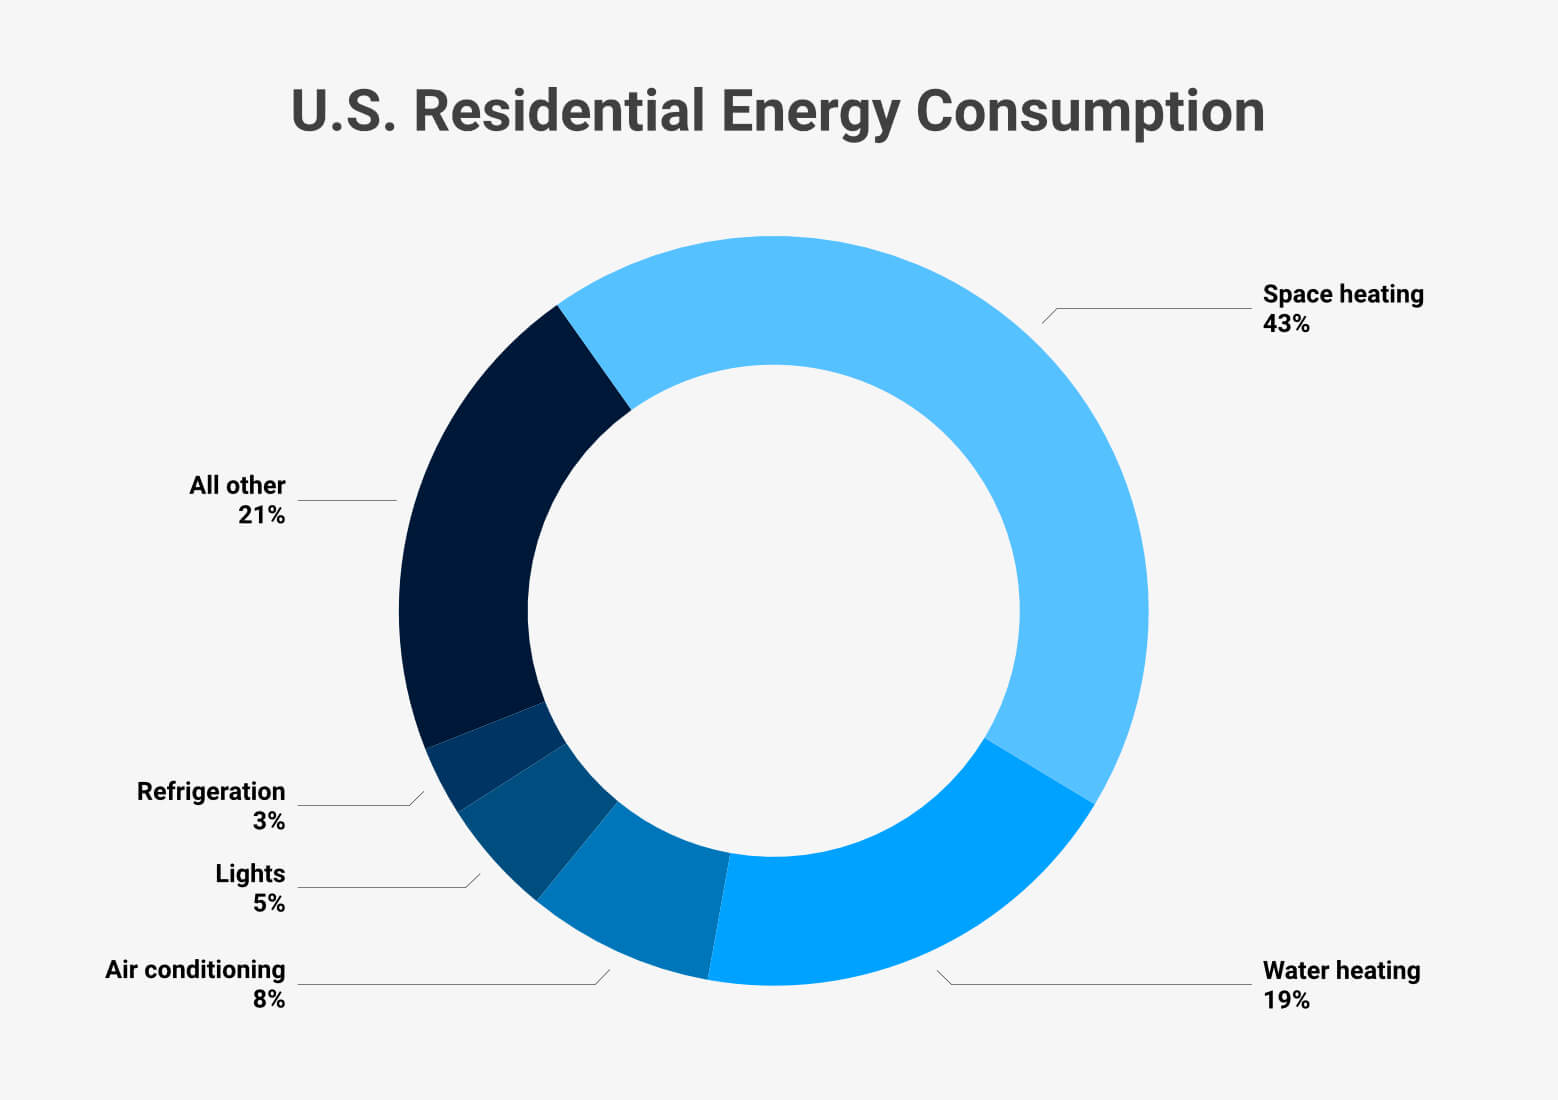 Percentage of Residential Energy Use by Category